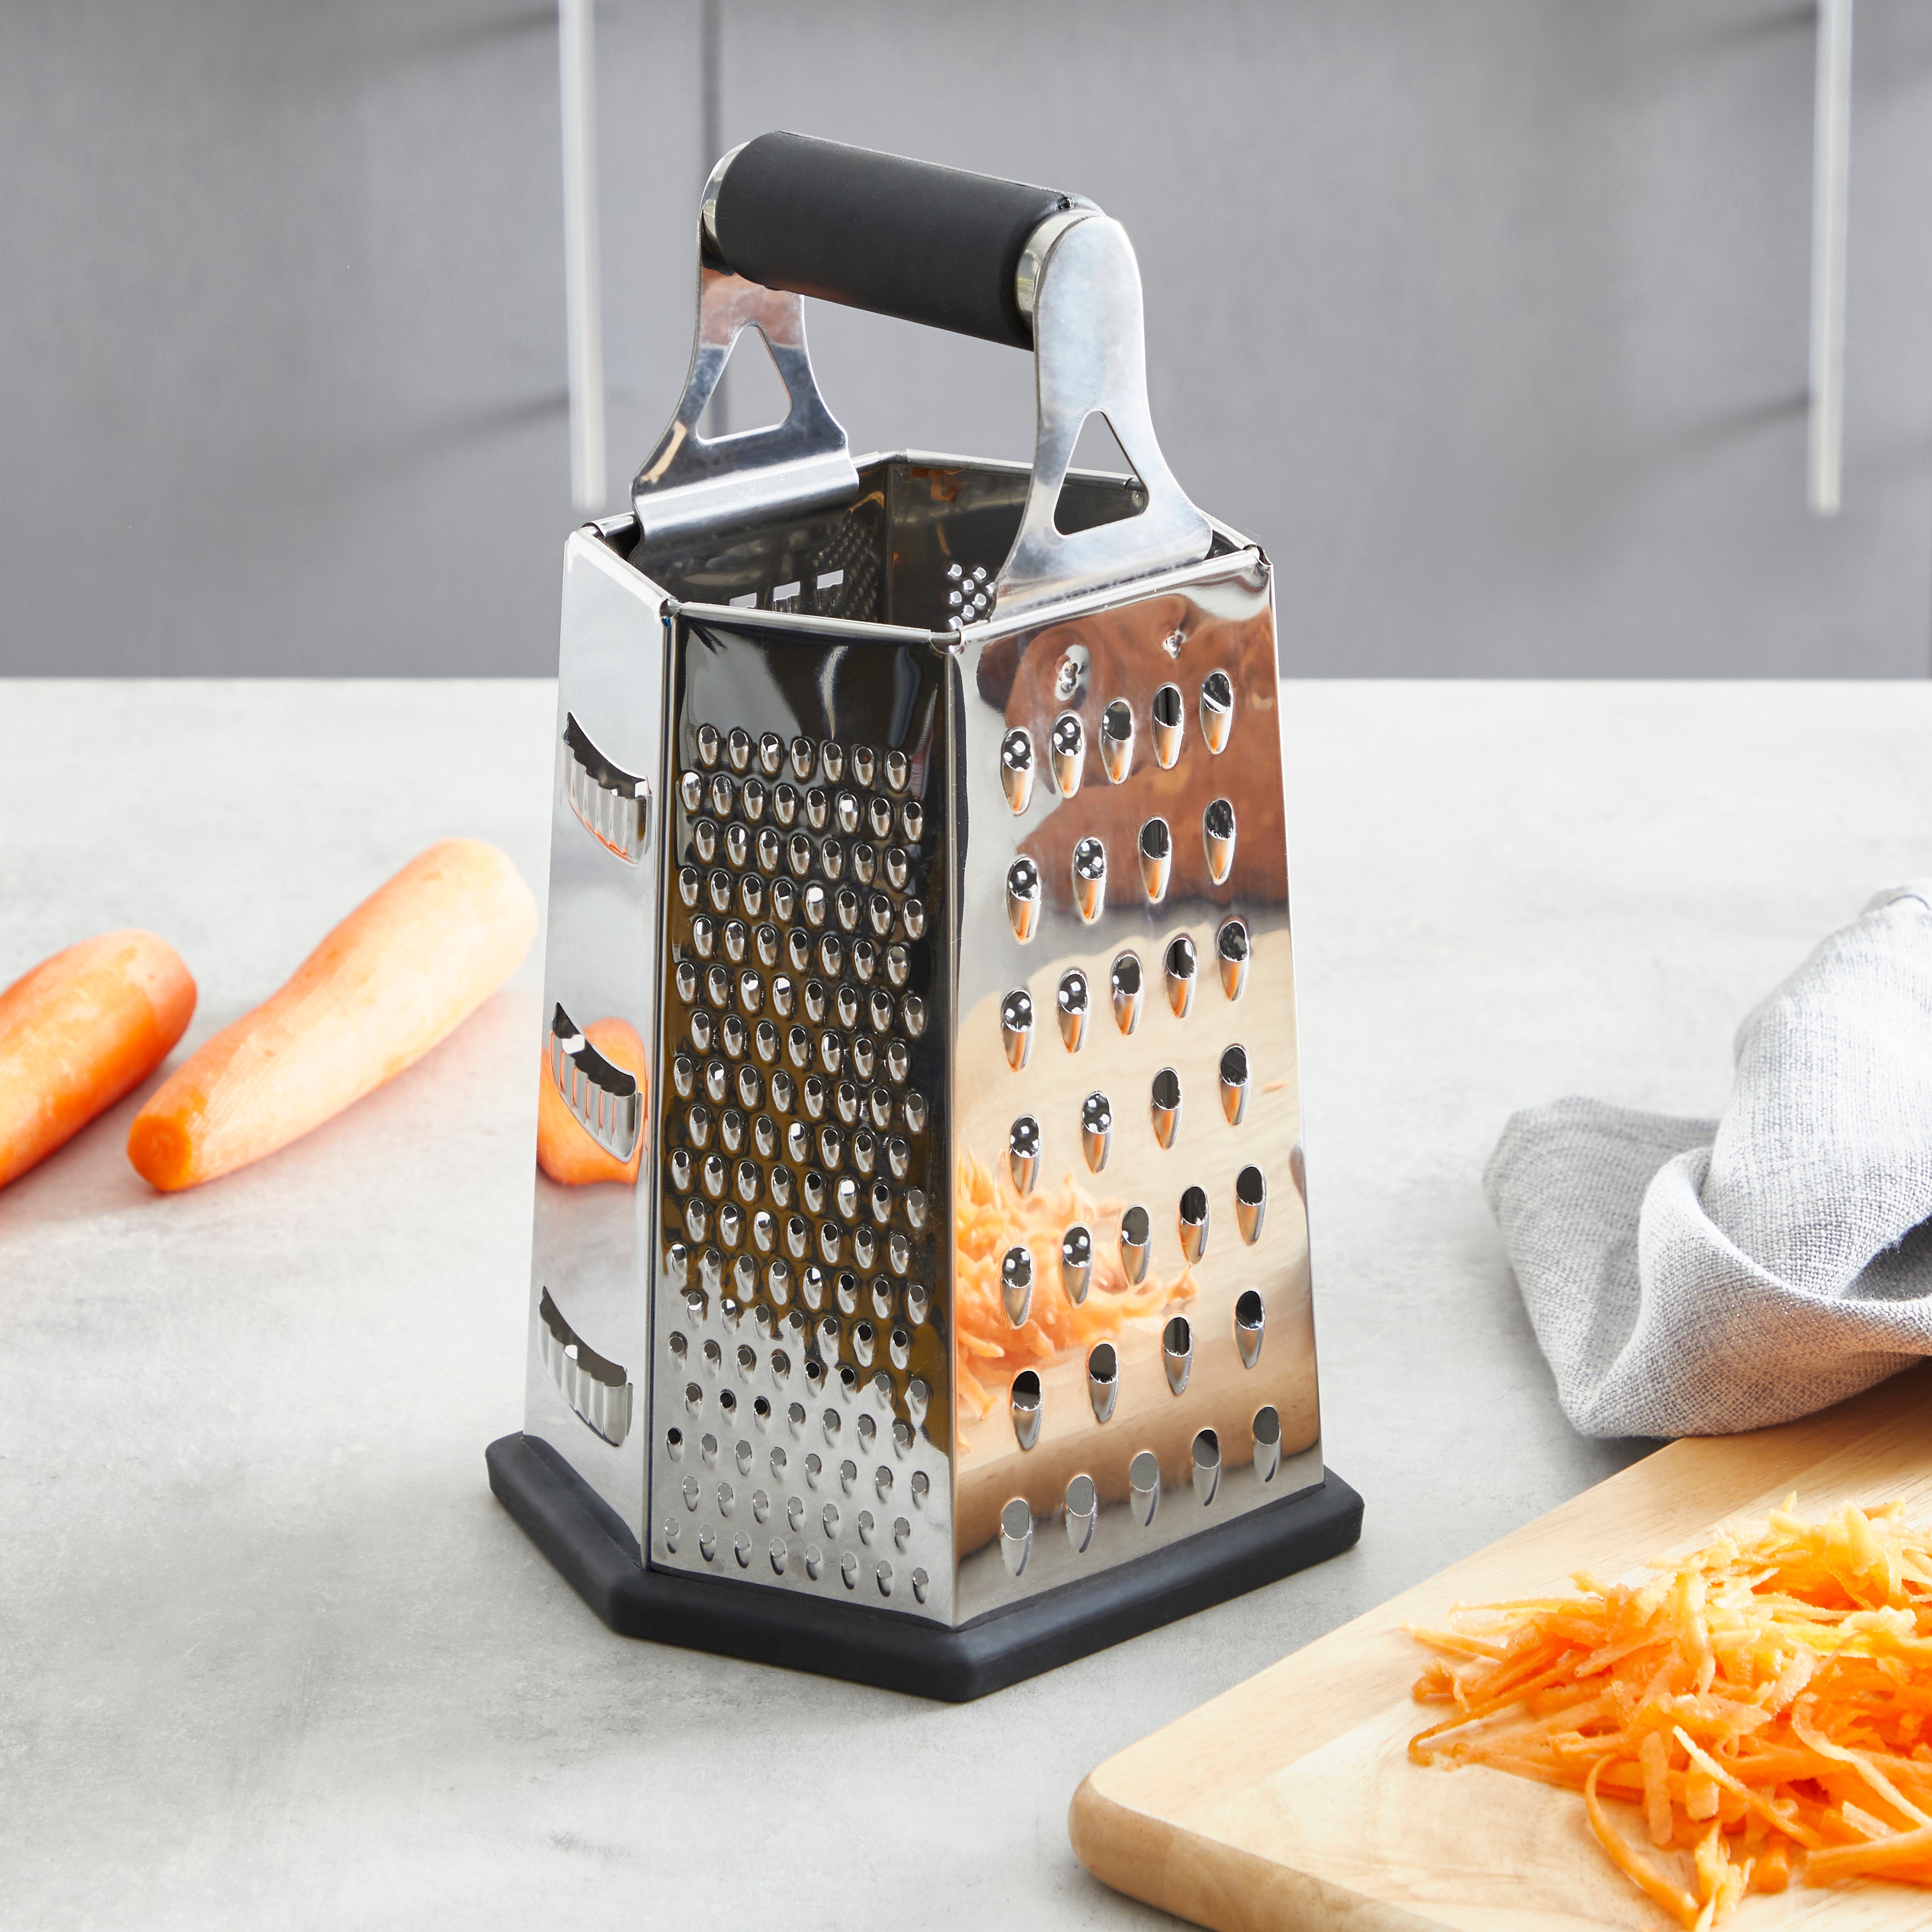 PRESS 6 Sided Box Grater